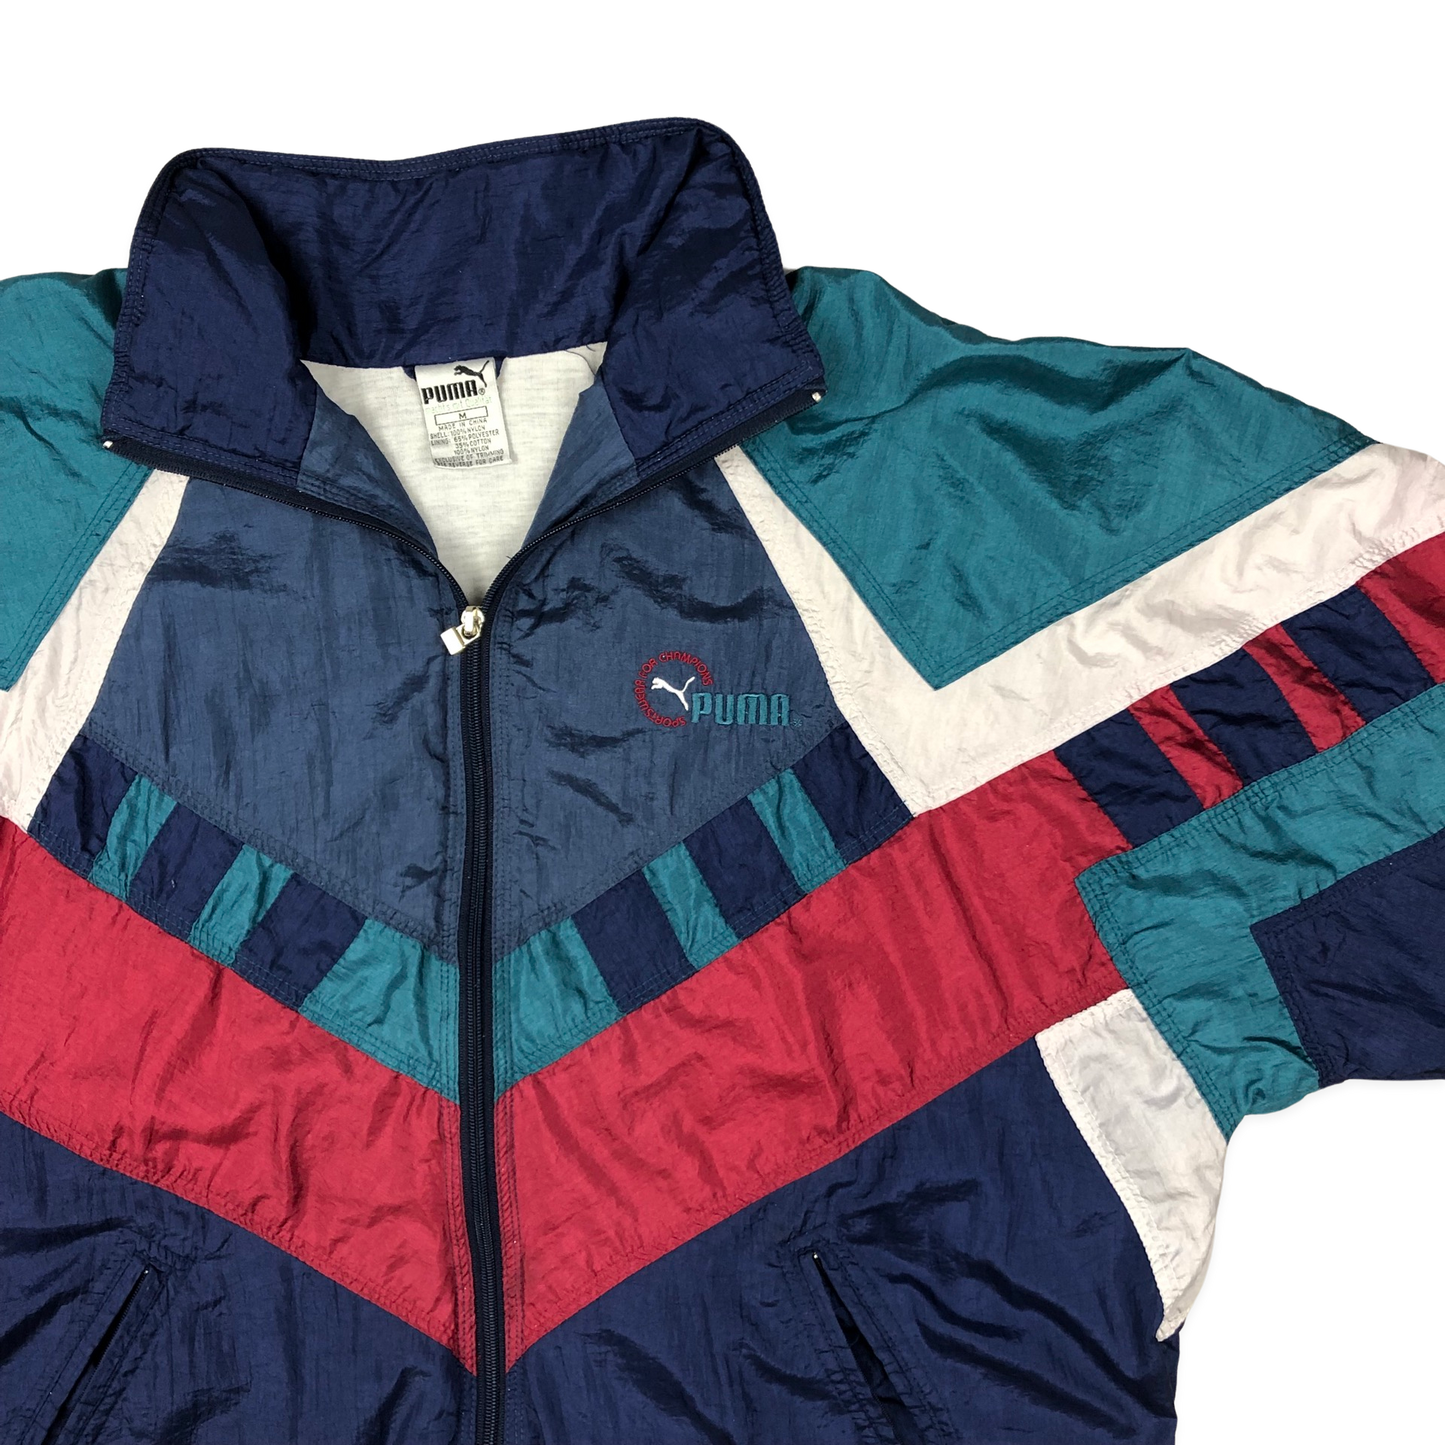 Vintage 80s 90s Puma Navy, Teal, and Red Shell Coat M L XL